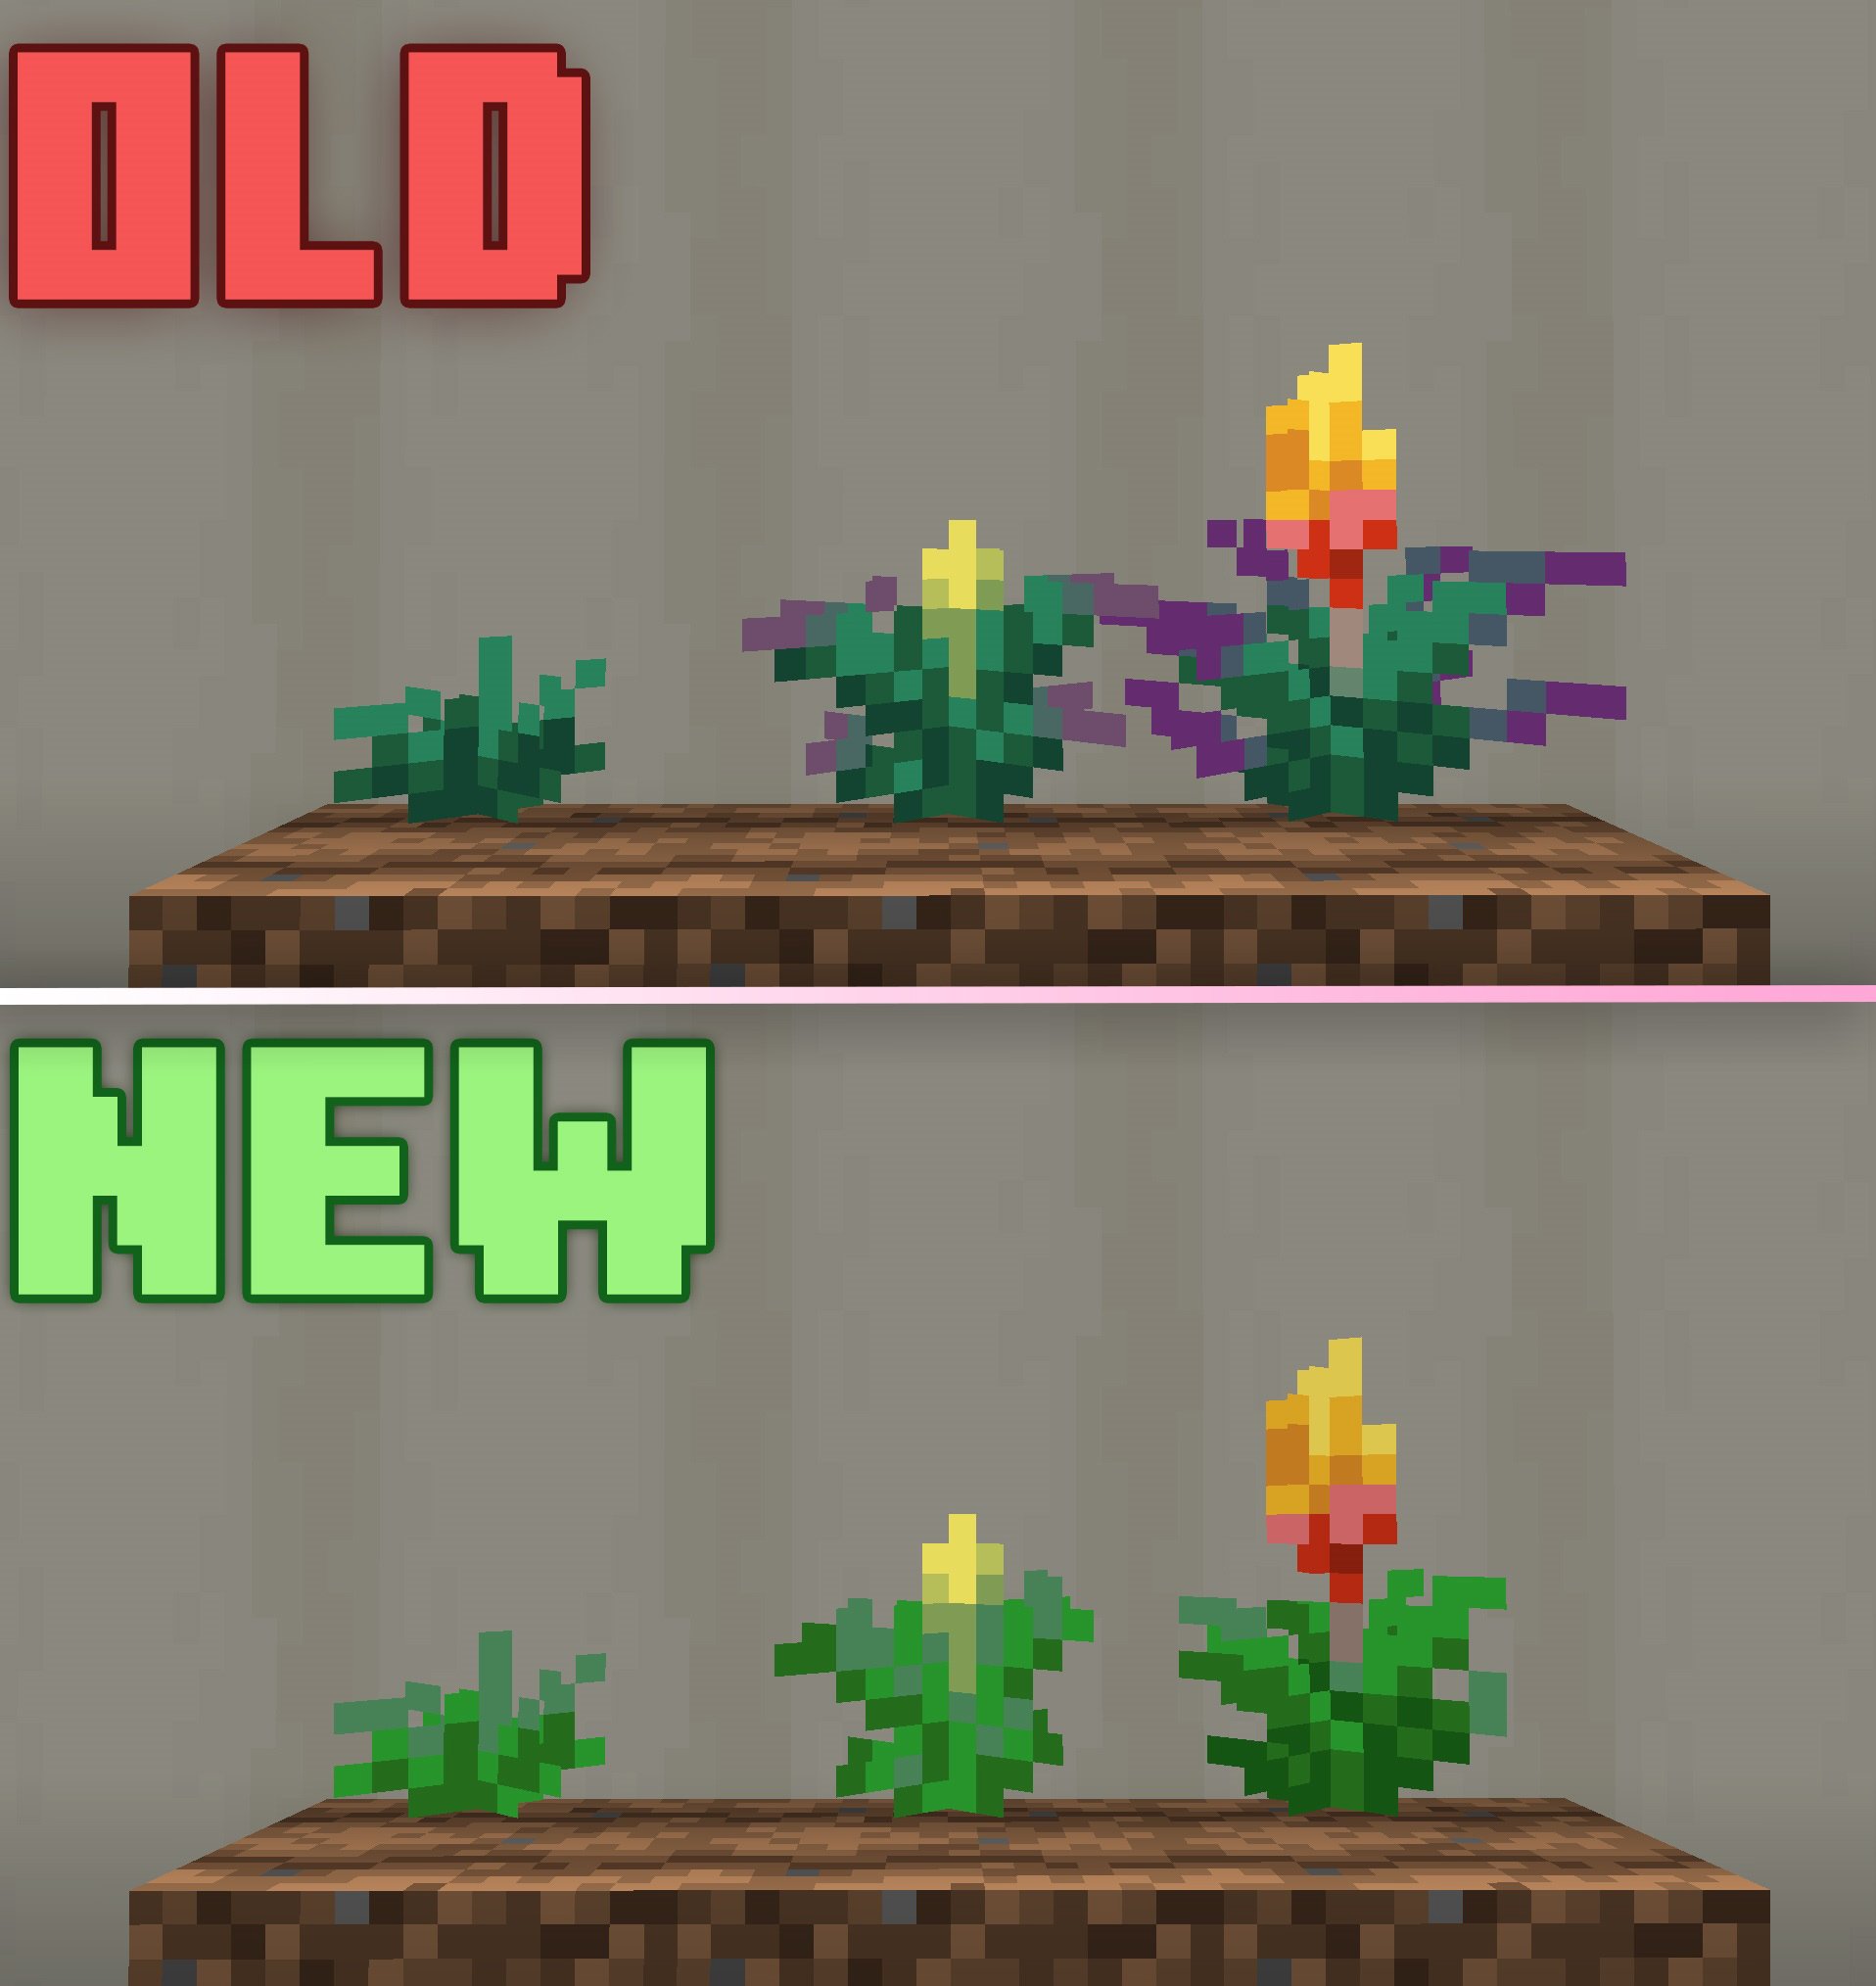 Comparison between old and new texture